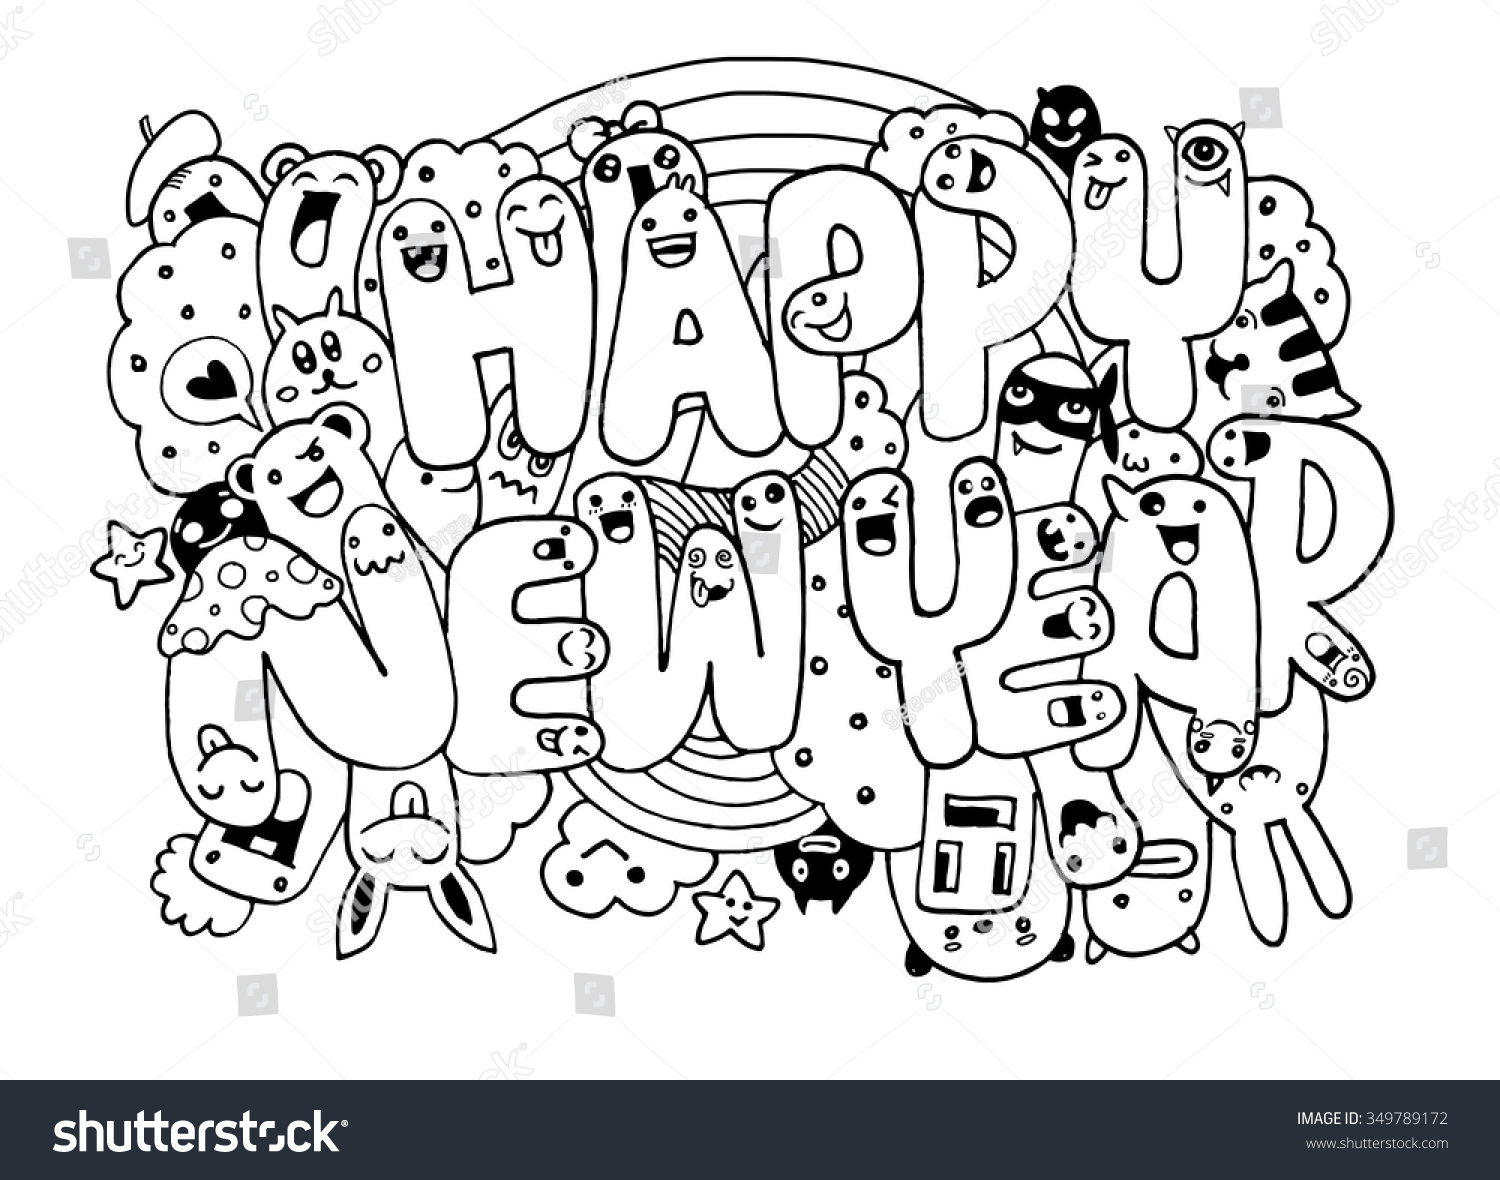 Doodle Style Happy New Year Sketch Stock Vector Royalty Free